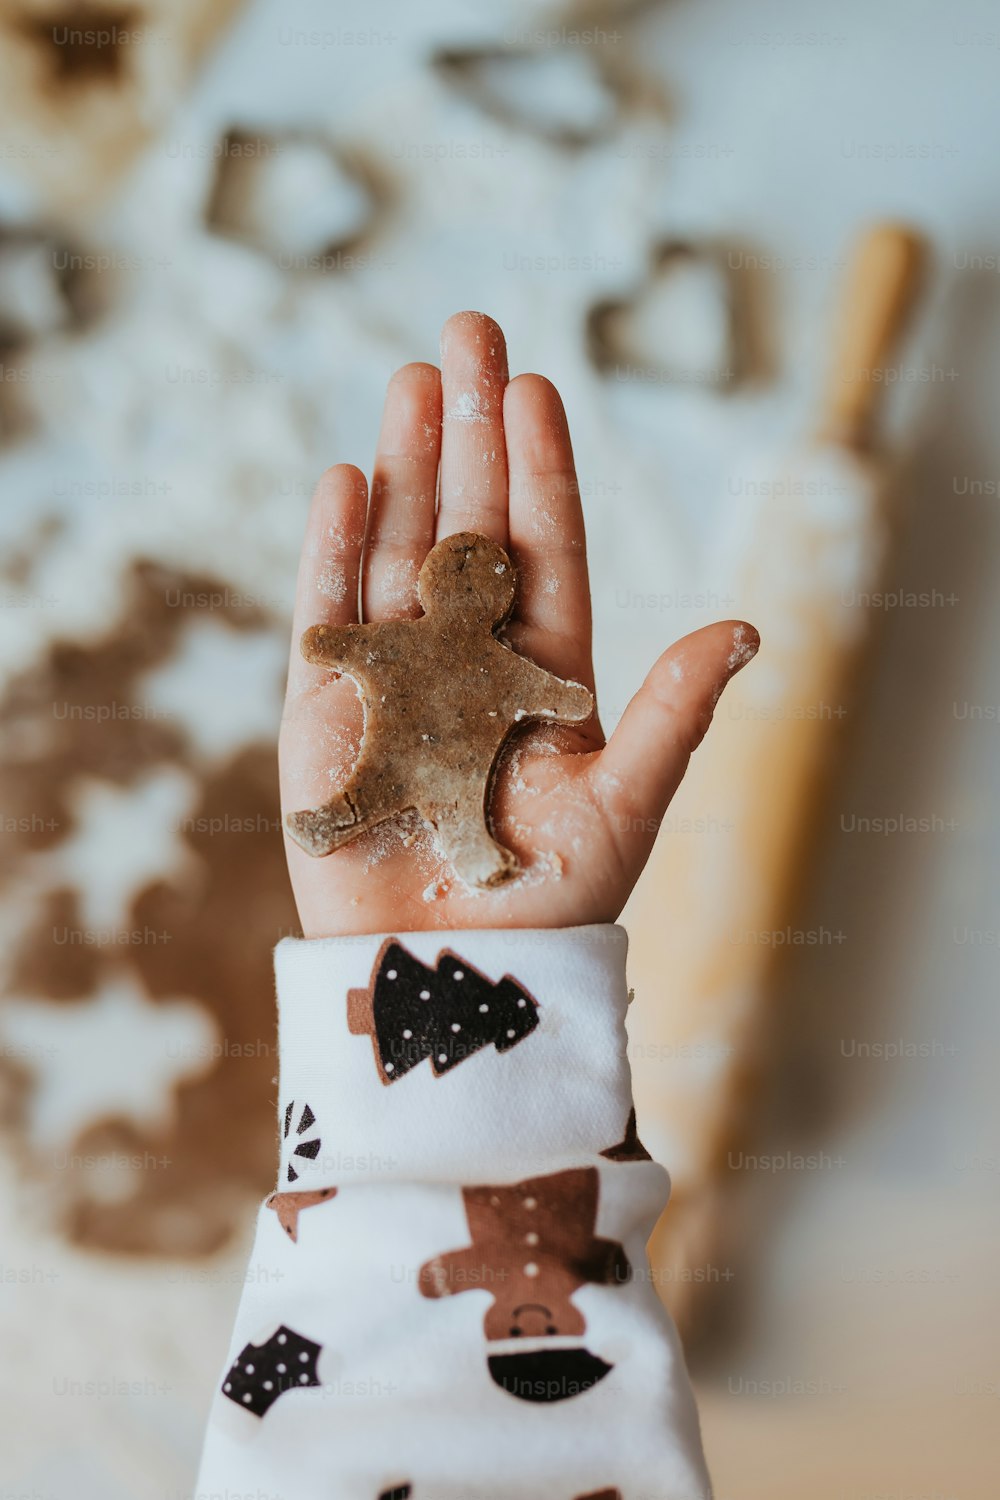 a hand holding a piece of food in it's palm